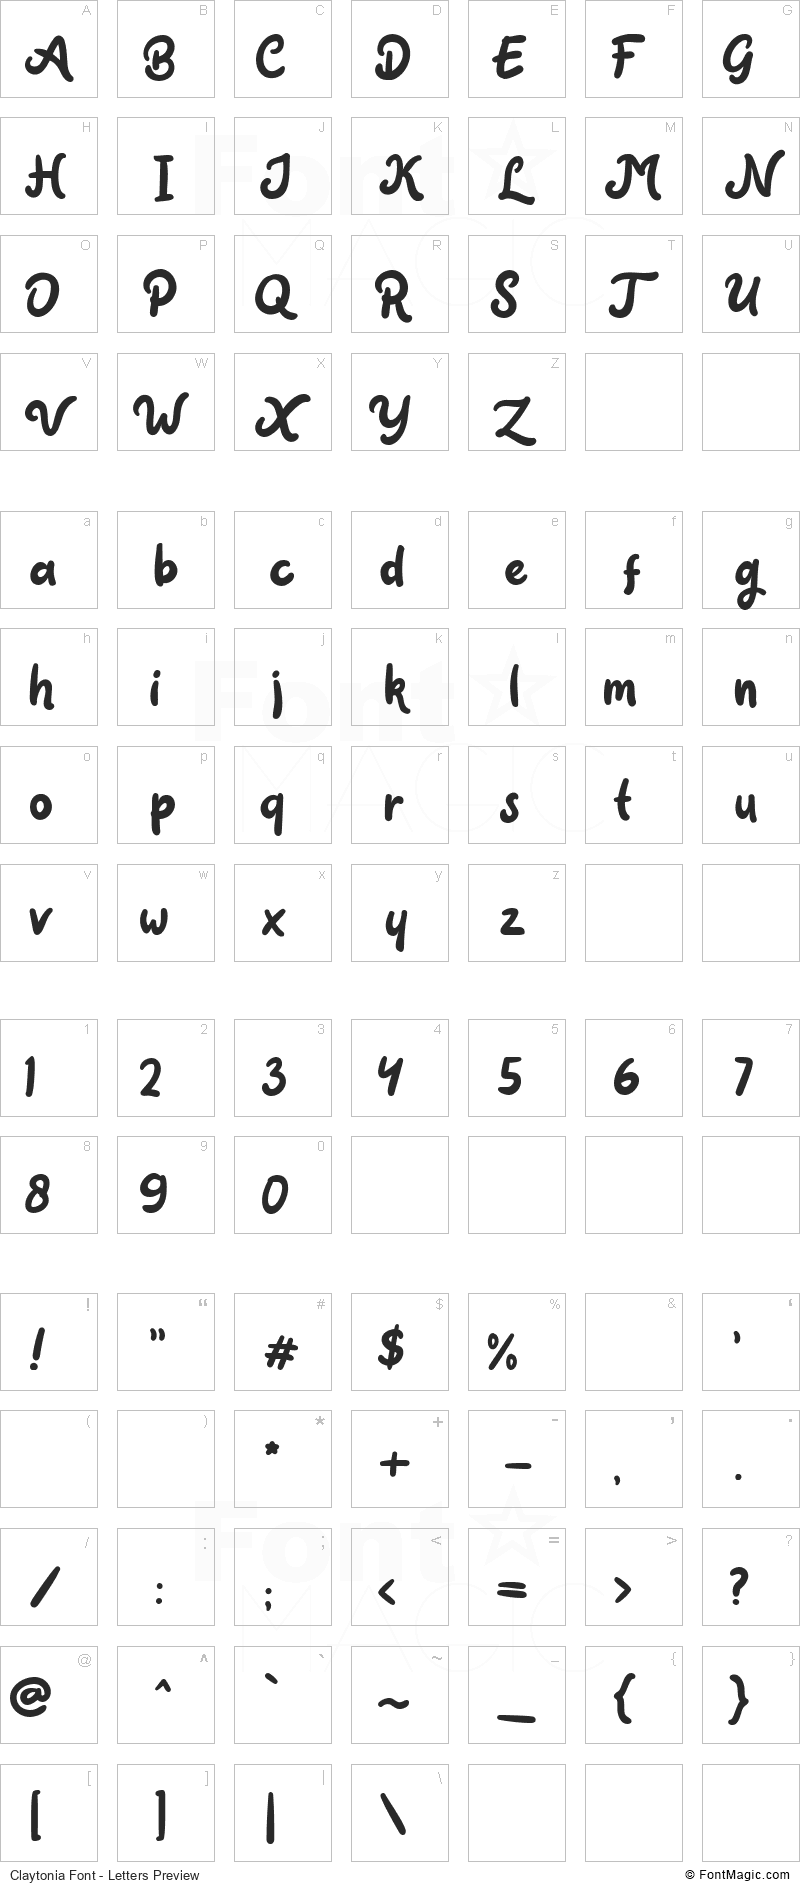 Claytonia Font - All Latters Preview Chart